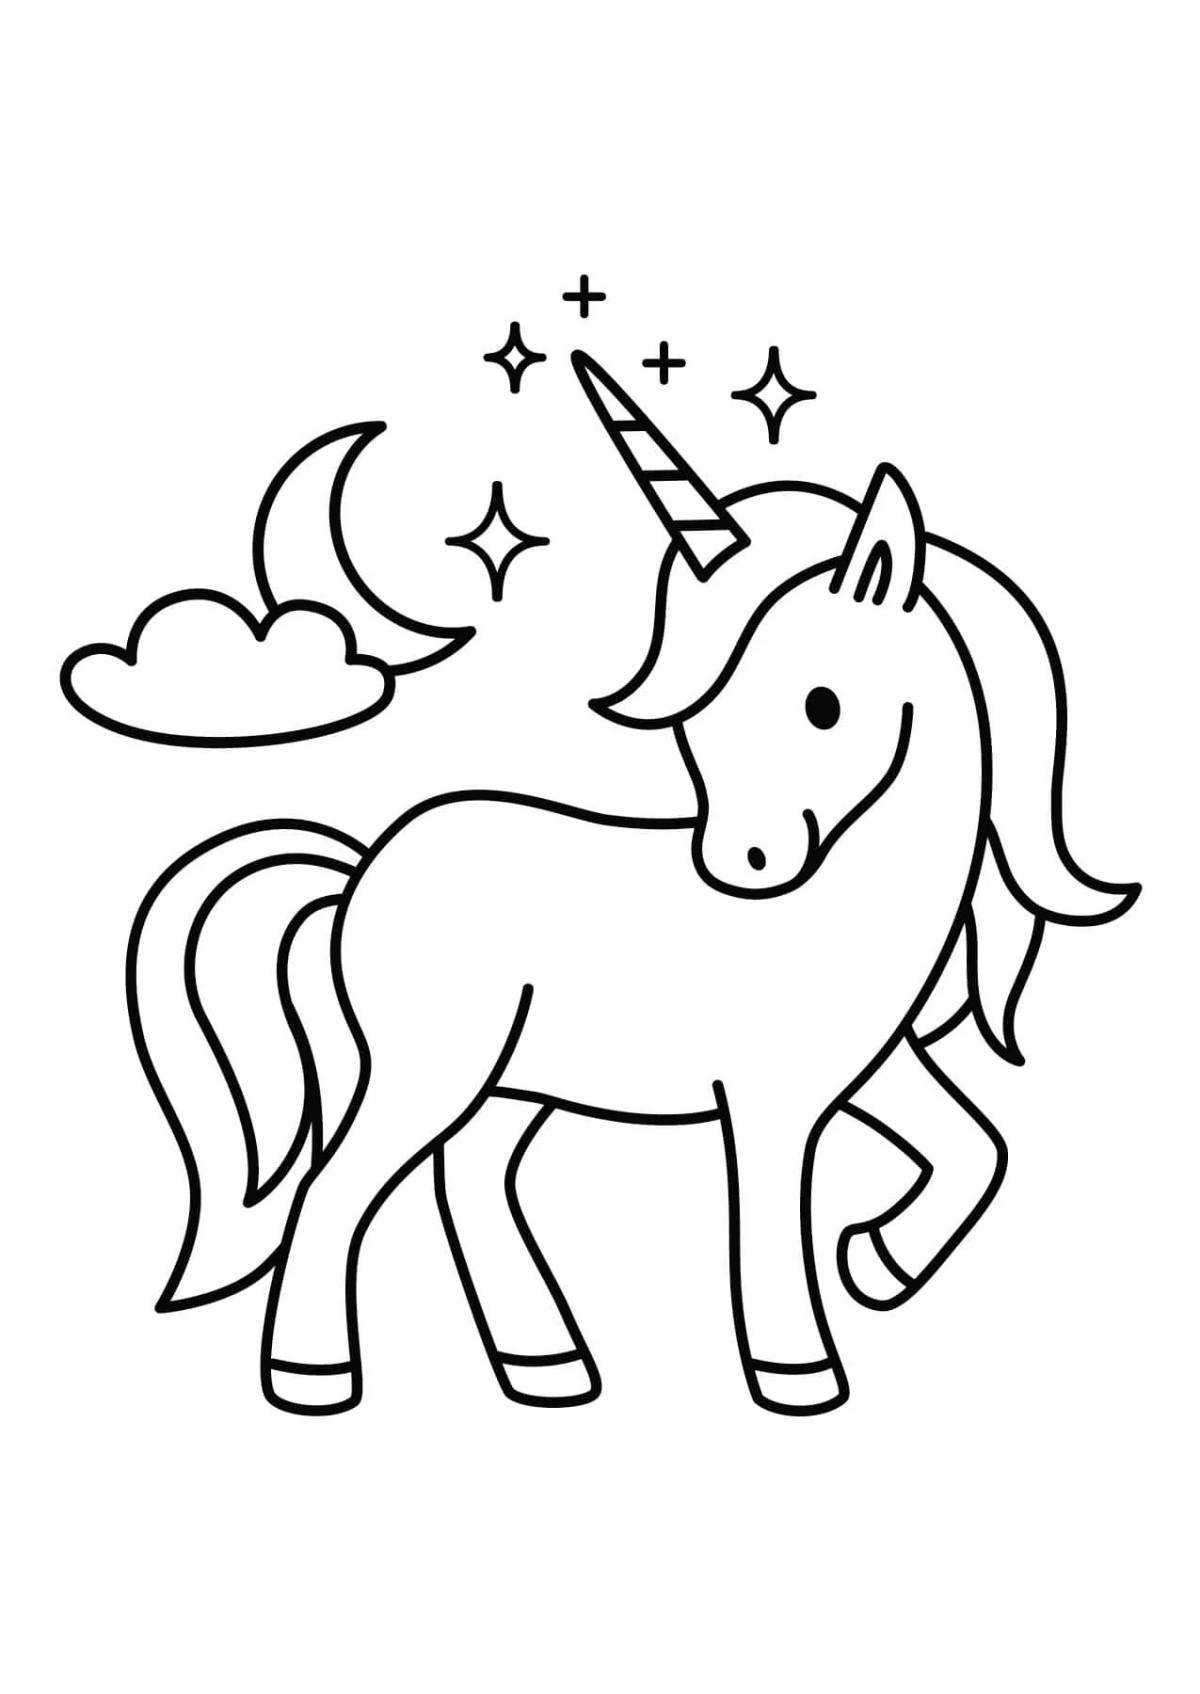 Wonderful coloring how to draw a unicorn